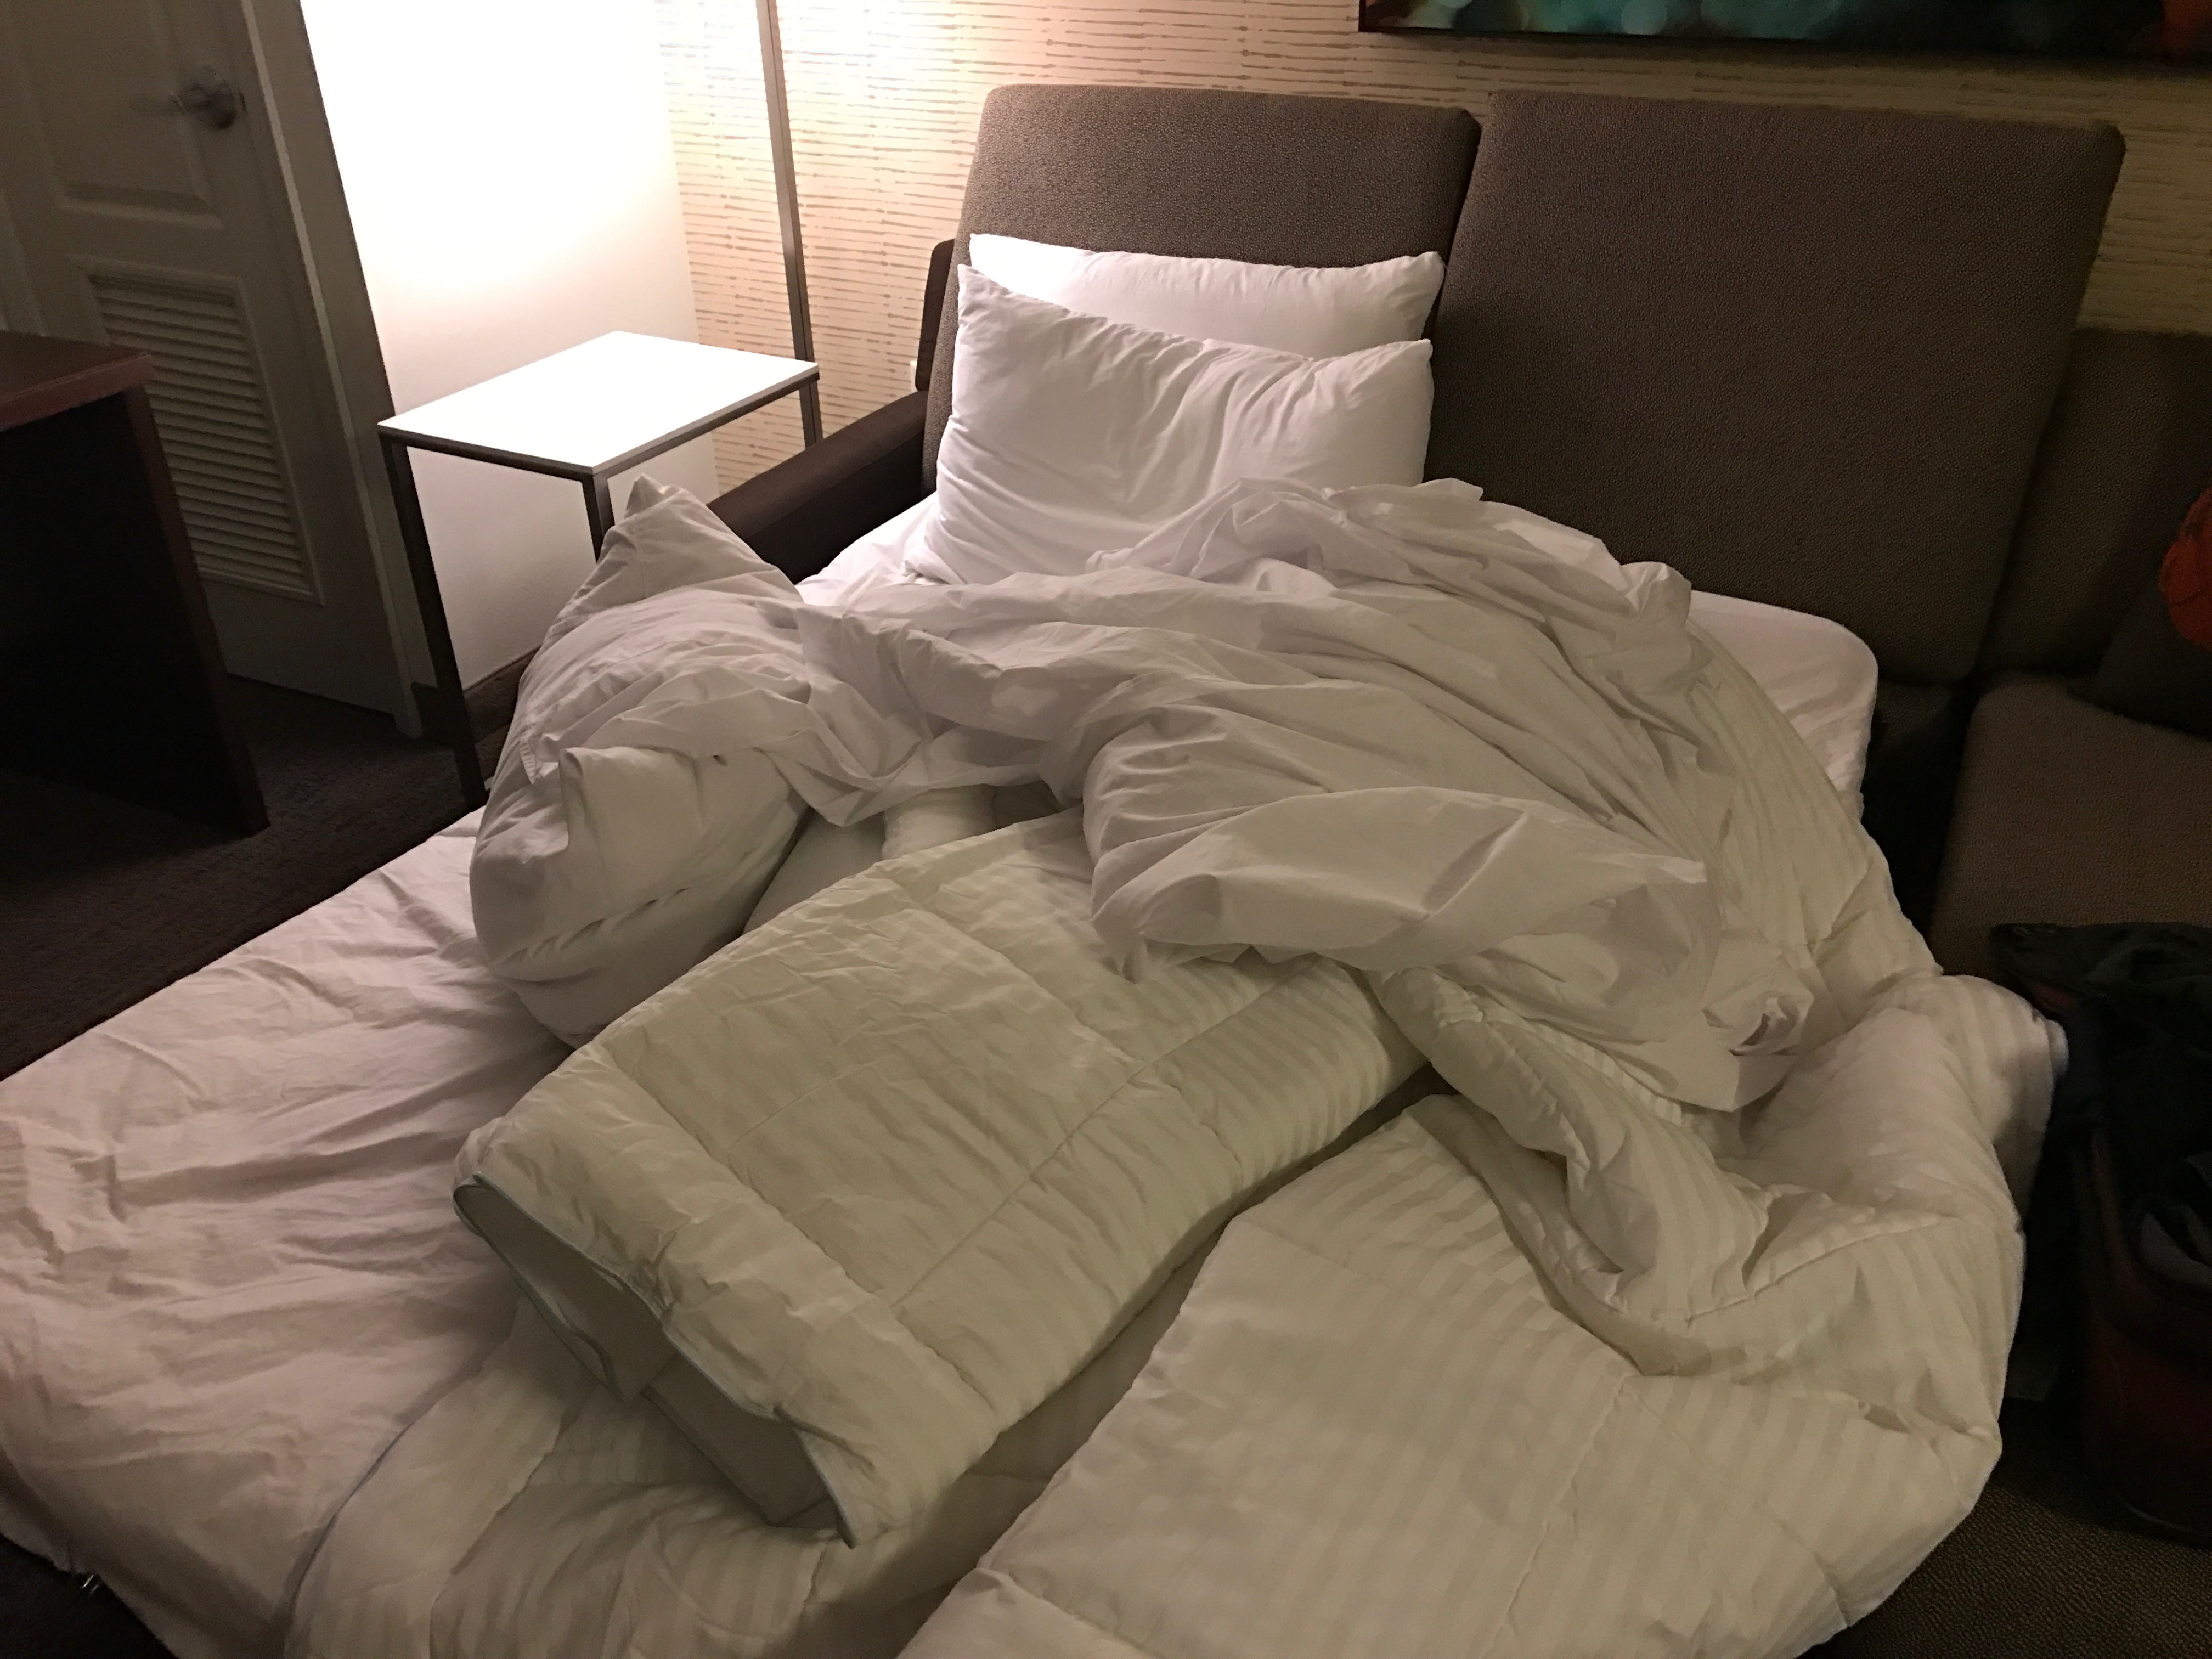 Beds During Your Hotel Stay